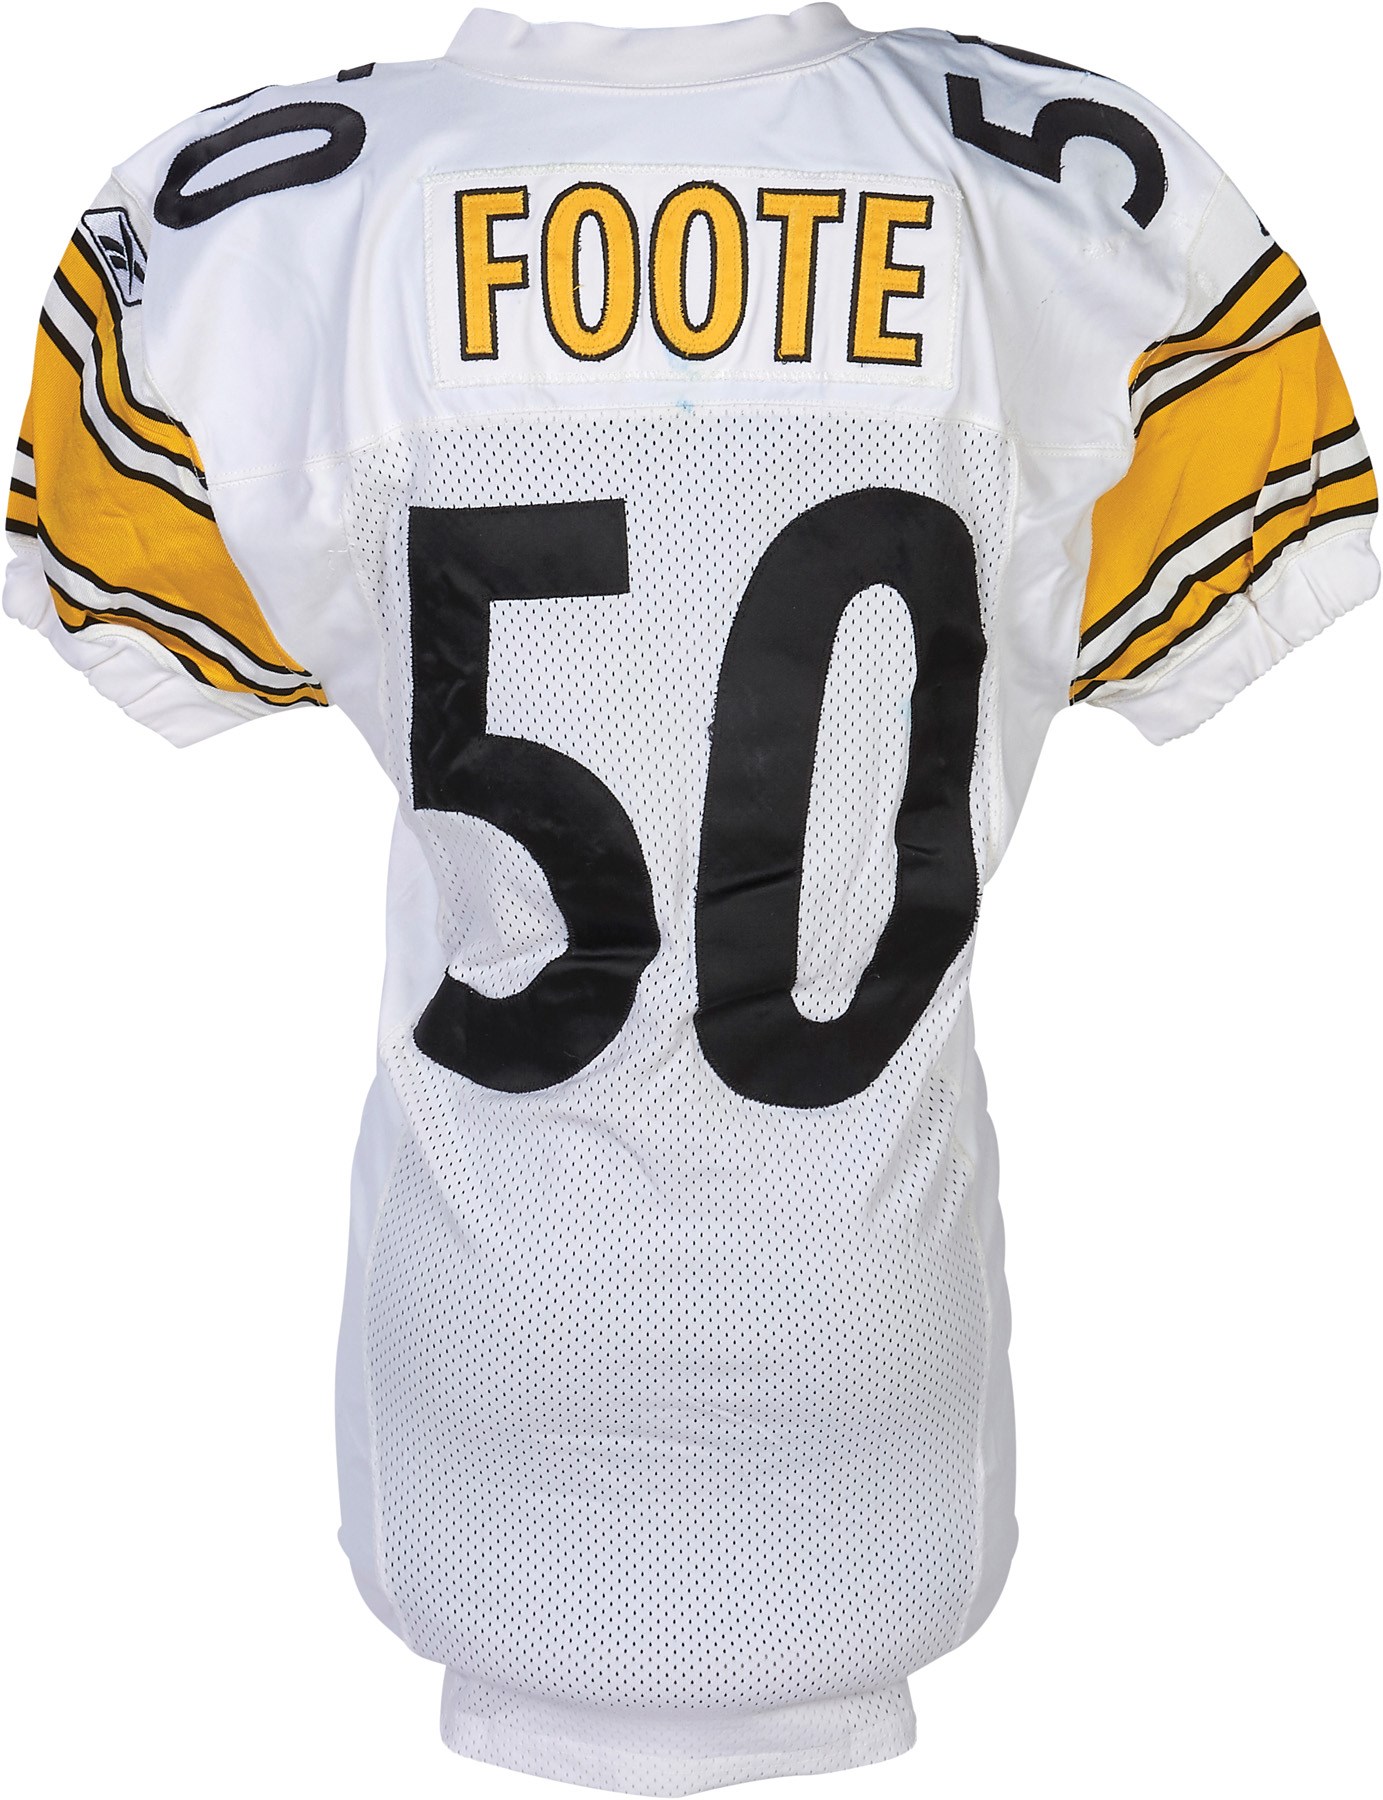 - 2002 Larry Foote Pittsburgh Steelers AFC Divisional Game Worn Jersey (Photo-Matched)